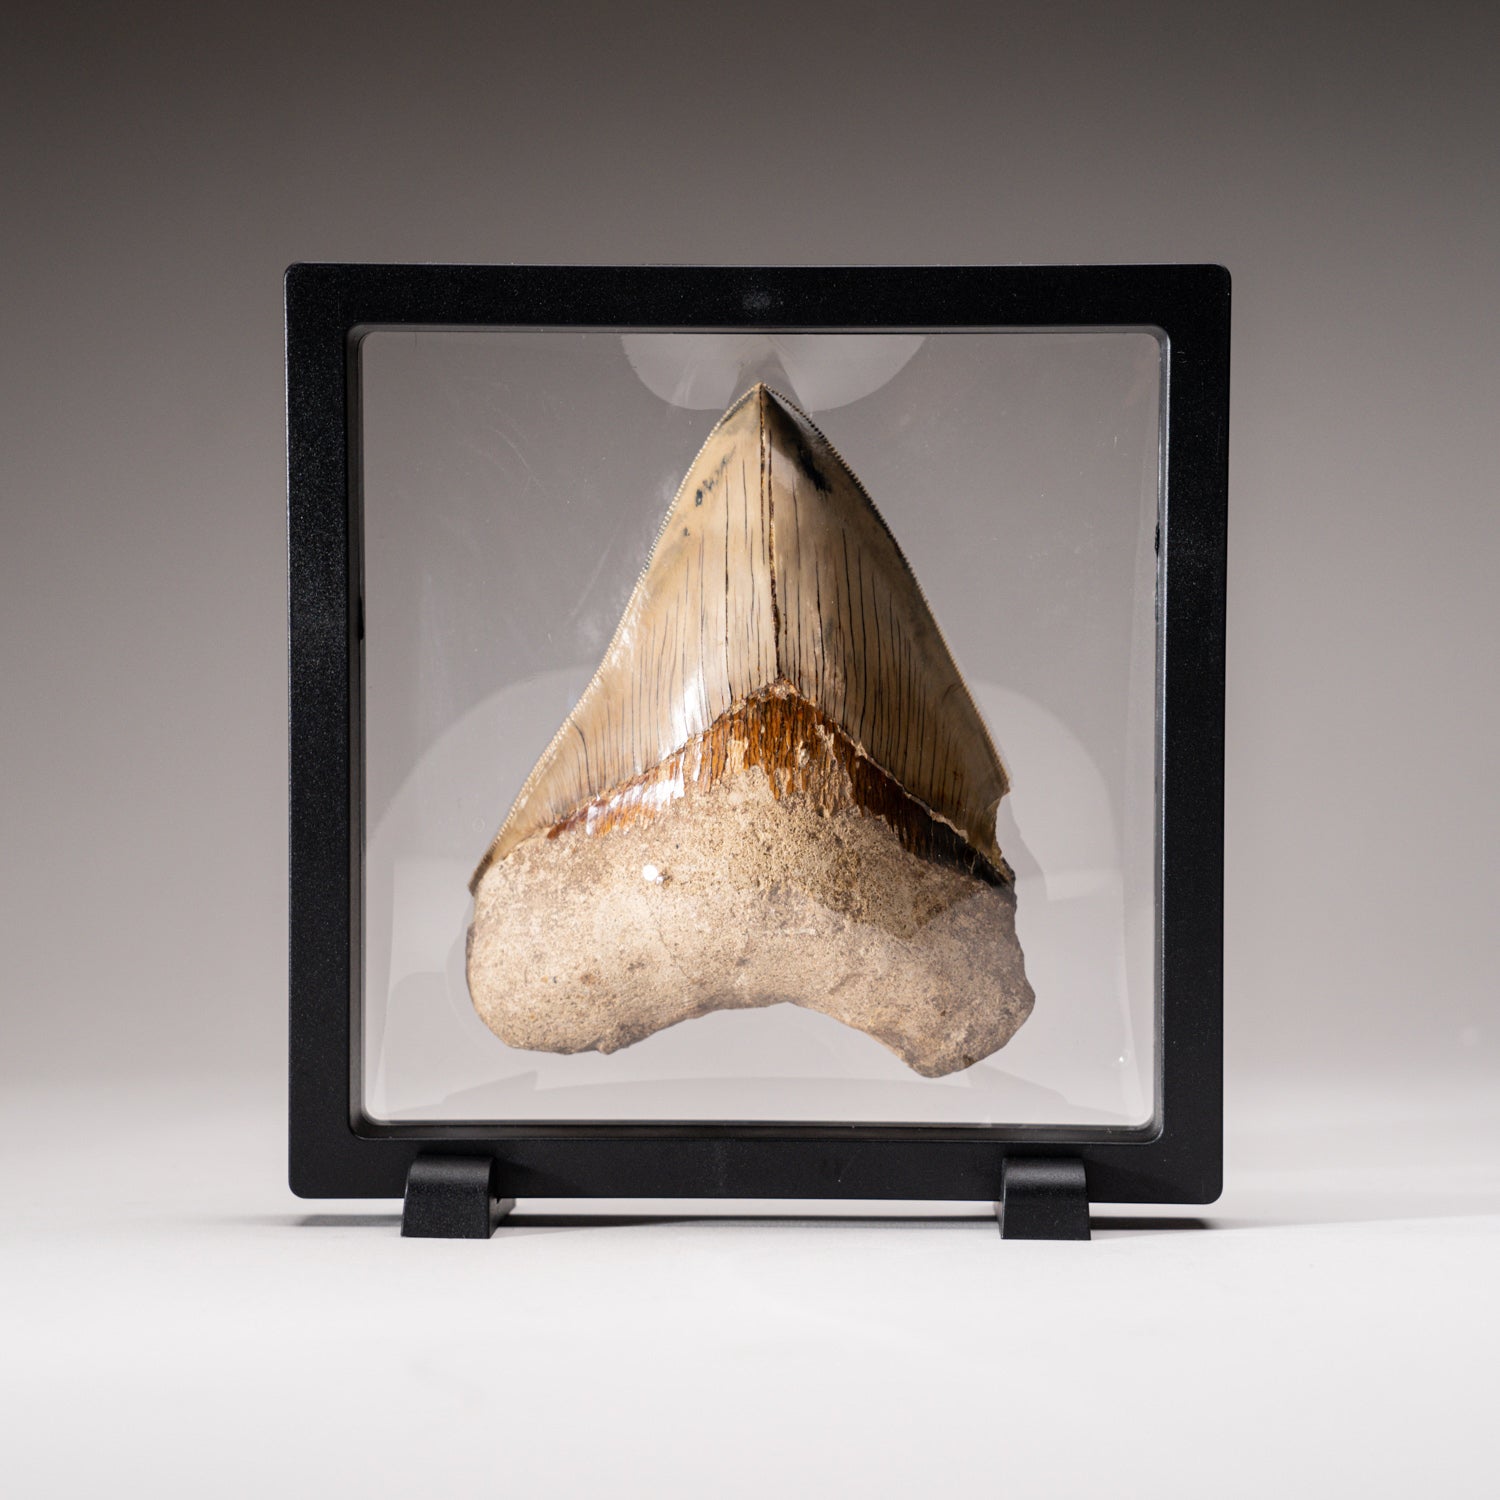 Large 5" Genuine Serrated Megalodon Shark Tooth from Indonesia in Display Box (263 grams)